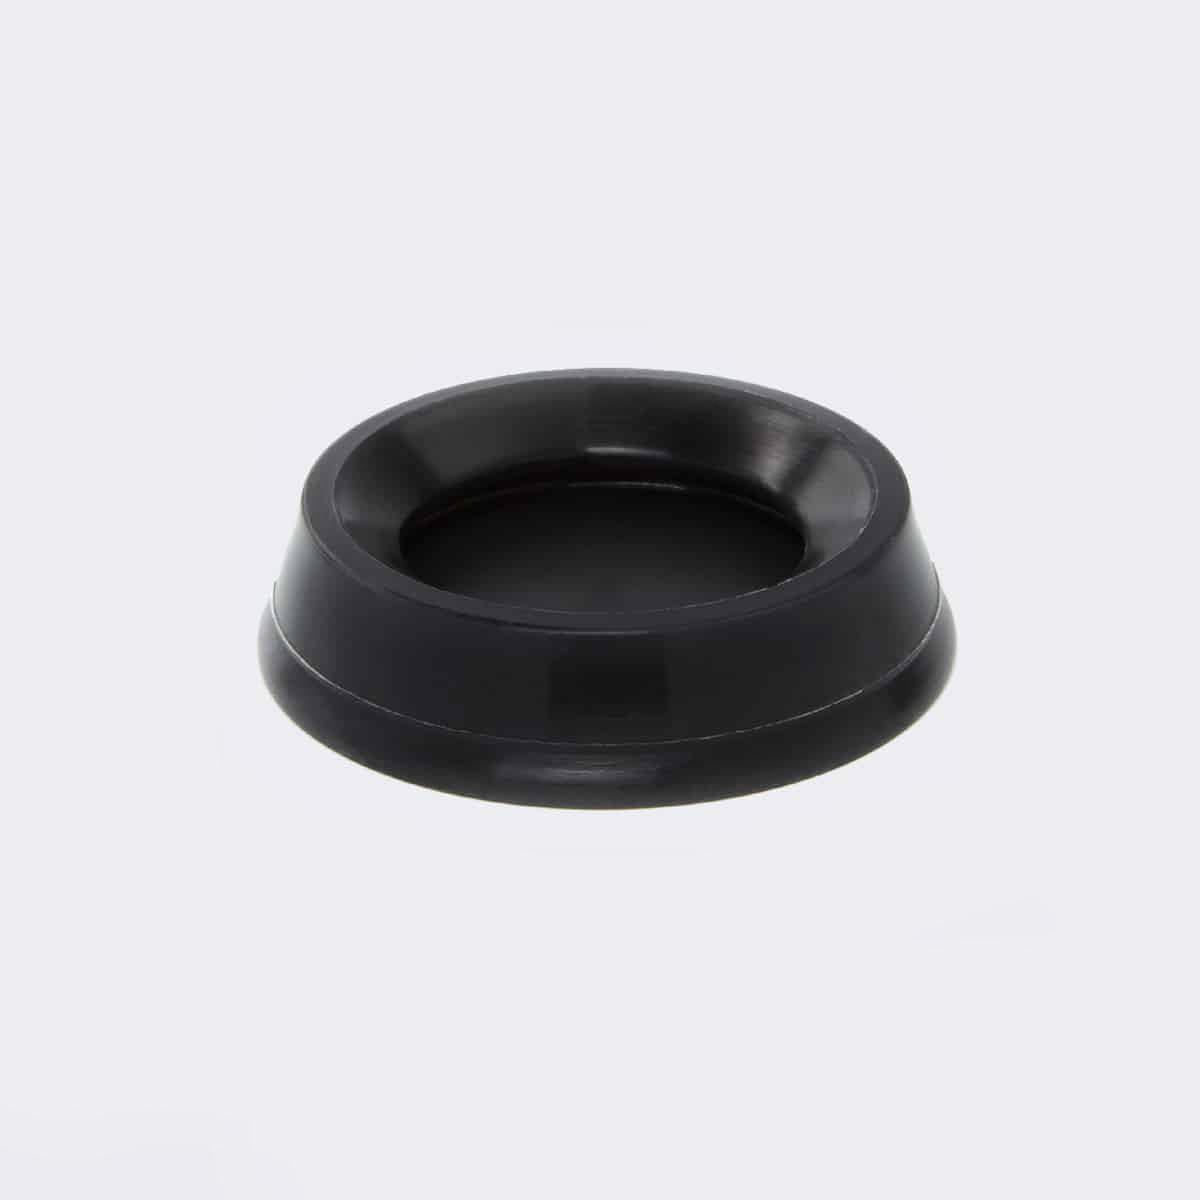 Replacement seal for end of plunger for both AeroPress Original and AeroPress Go